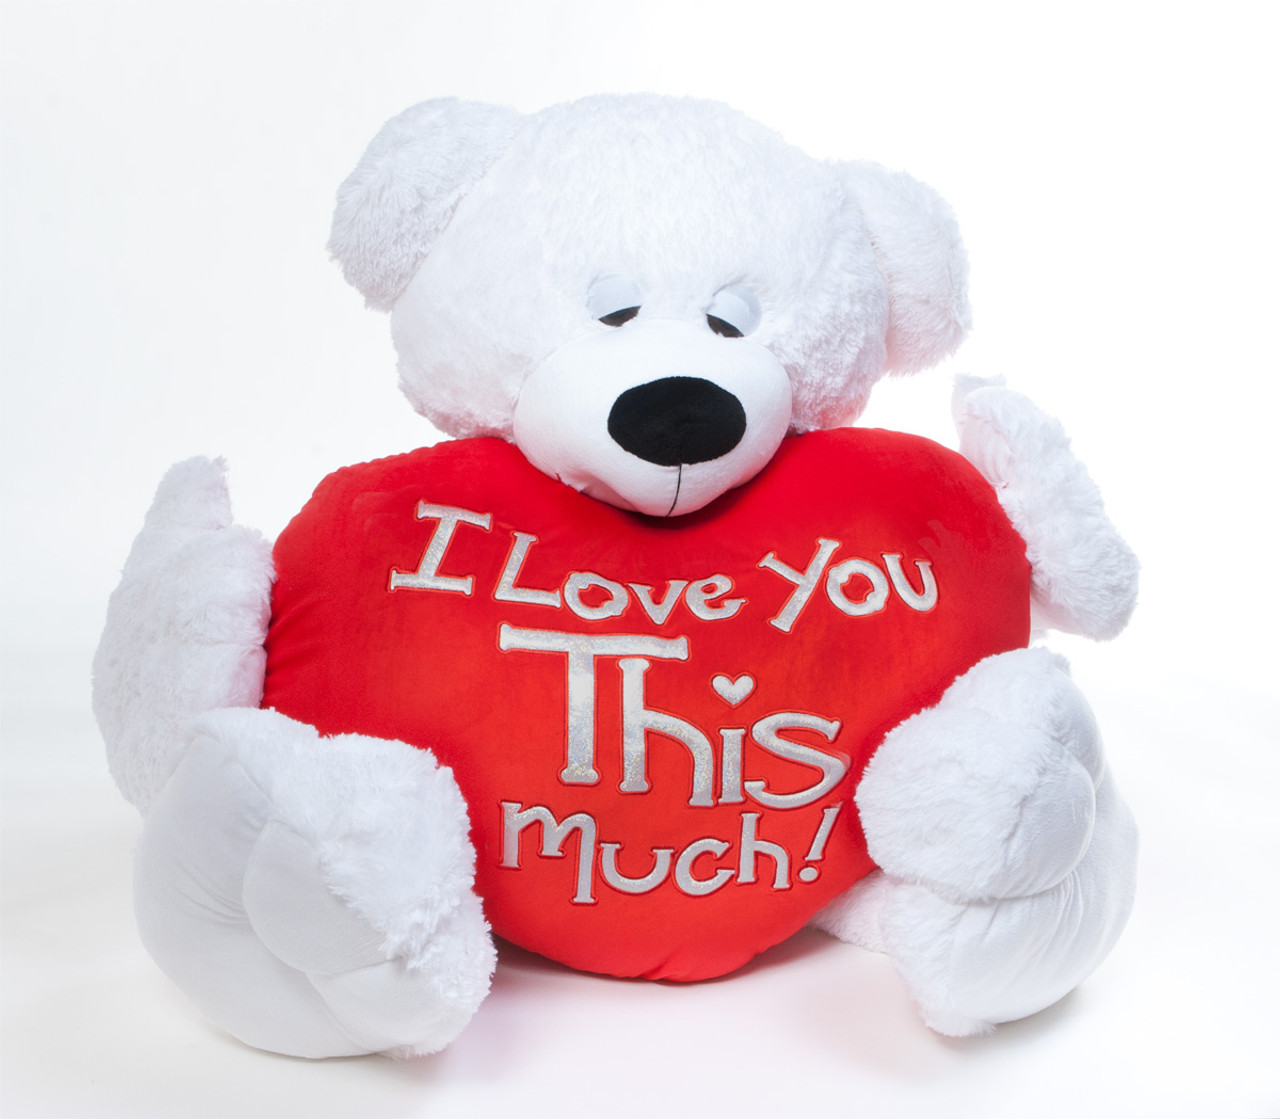 Paw Mittens big teddy bear with "I Love You This Much" heart shaped pillow